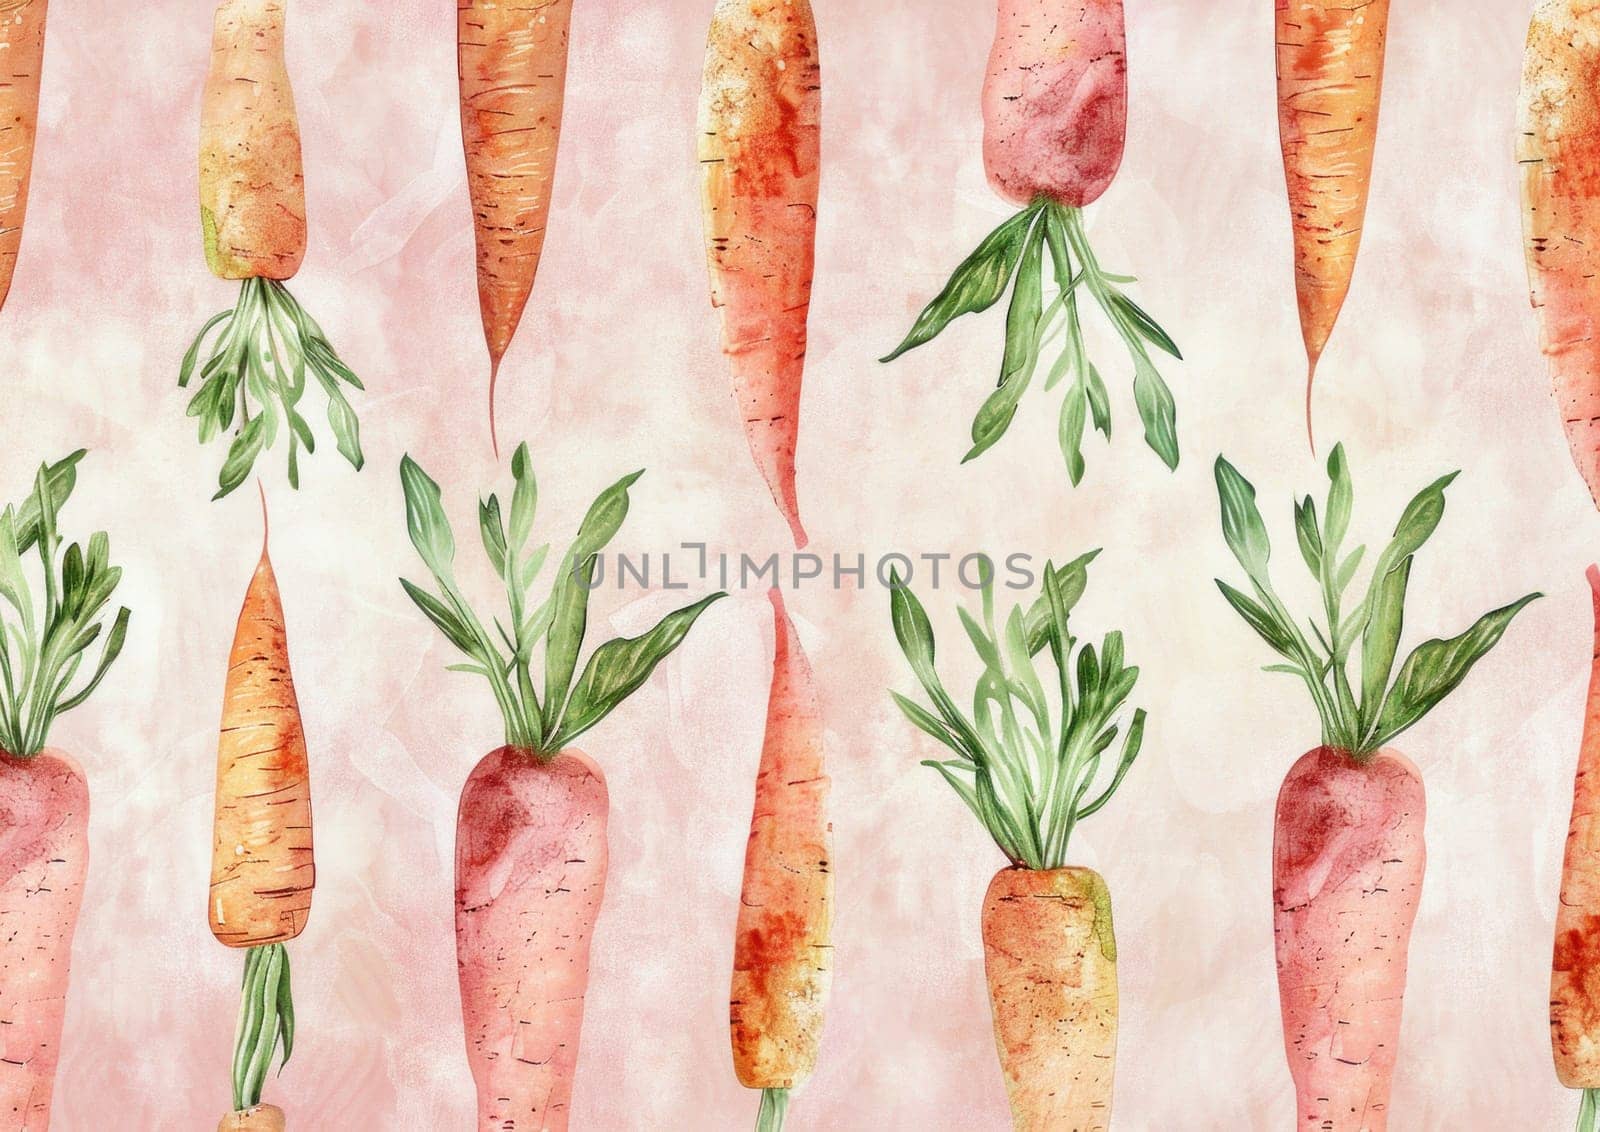 Watercolor pattern of carrots on pink background with green leaves fresh and healthy vegetable art design for kitchen and garden decor